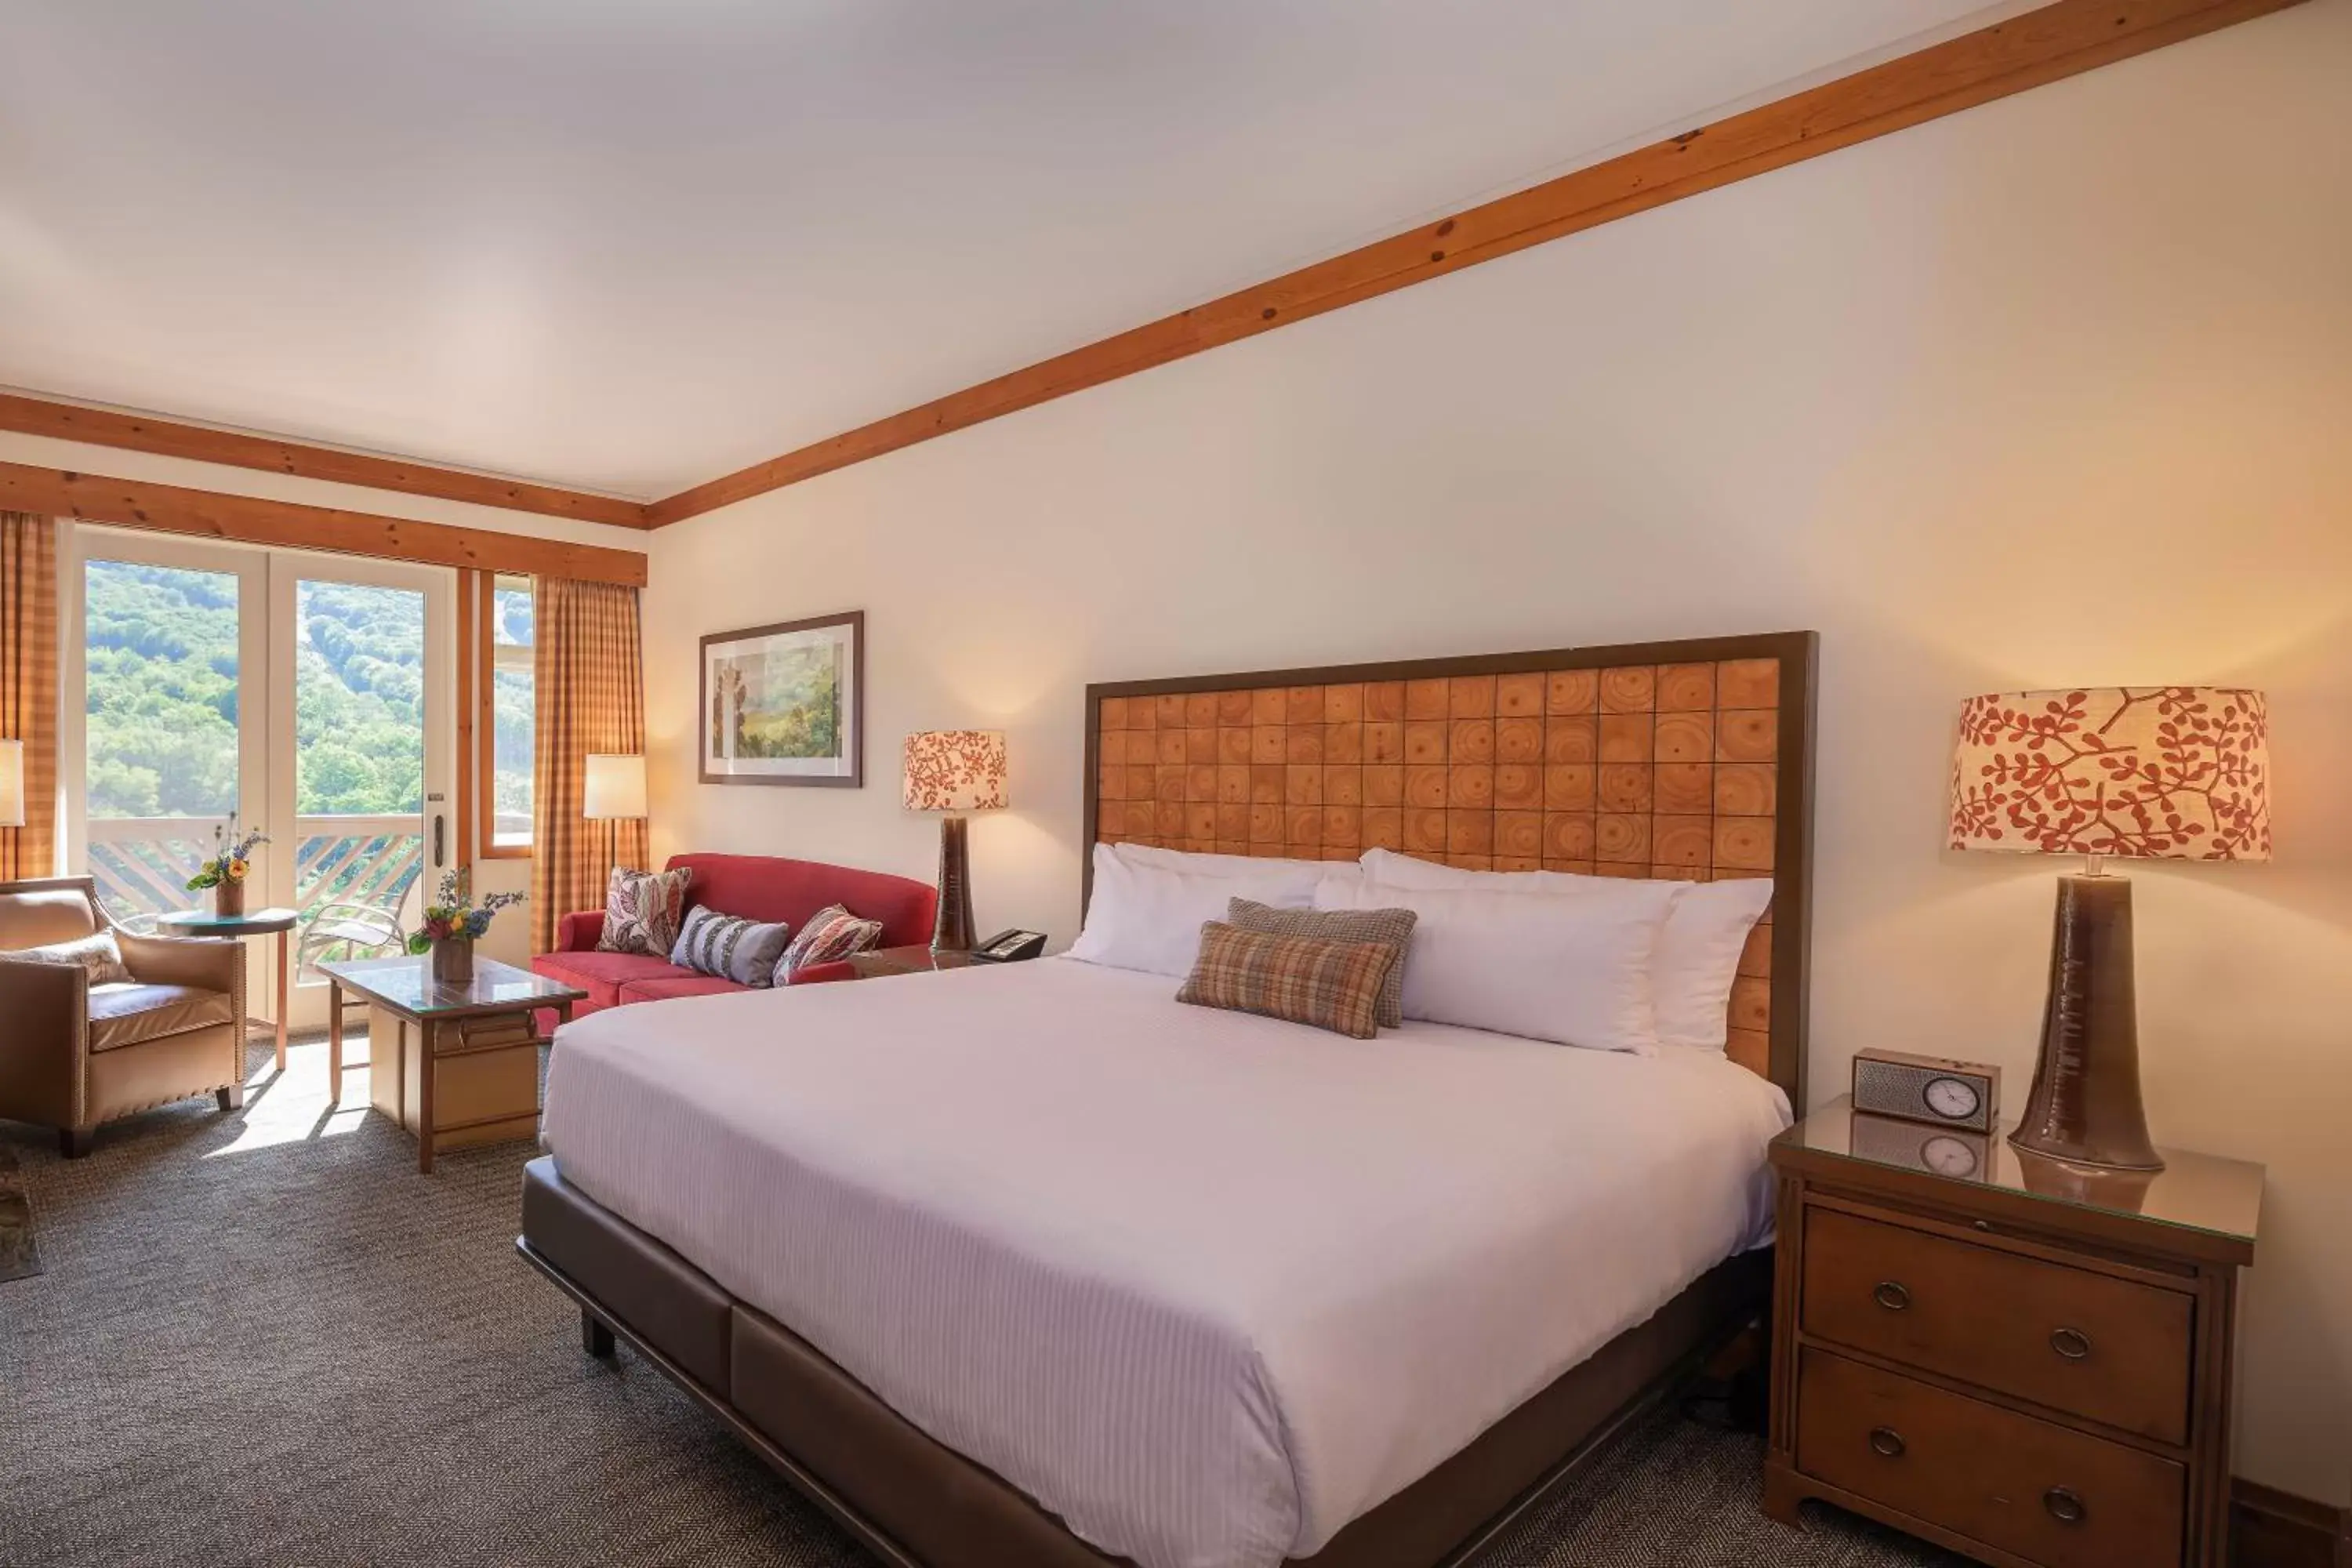 Studio in The Lodge at Spruce Peak, a Destination by Hyatt Residence